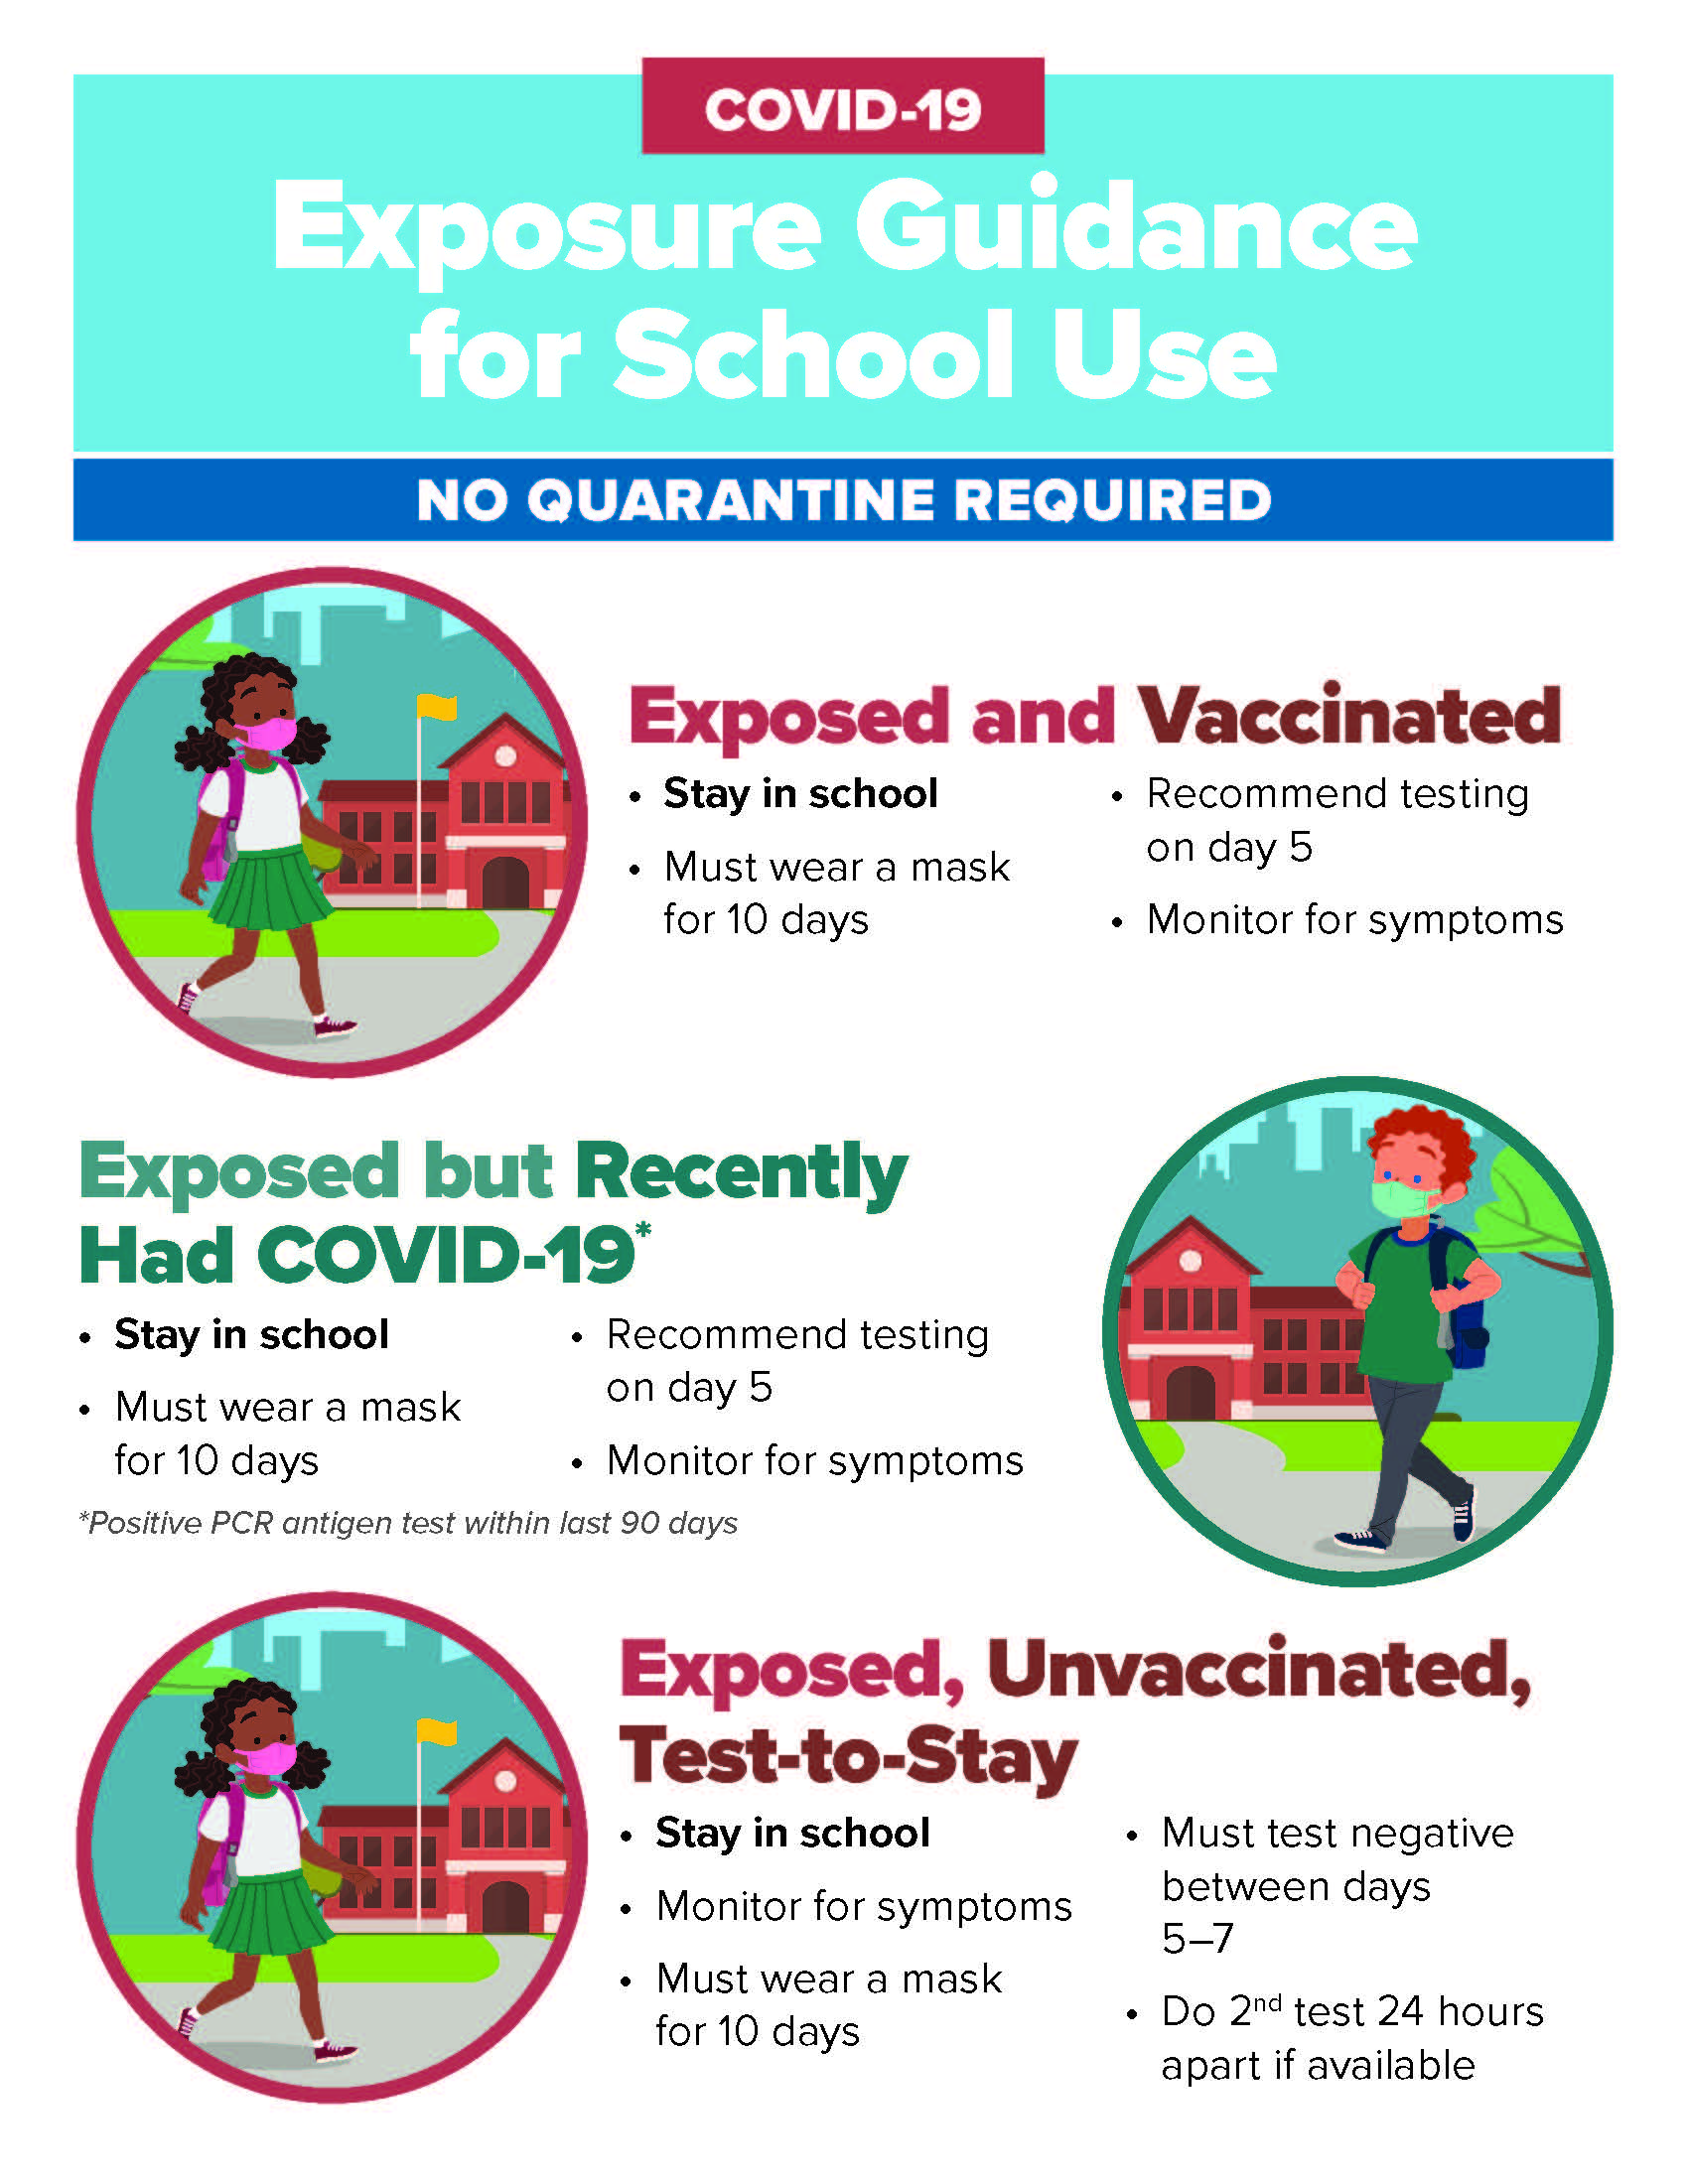  Visual aid for covid exposure guidelines that features vector illustrations of students in masks. Covid 19 exposure guidance for school use. No quarantine required. Exposed and vaccinated: stay in school, must wear a mask for 10 days, recommended testing on day 5, Monitor for symptoms. Exposed but recently had covid 19: Stay in school, must wear a mask for 10 days, recommend testing on day 5, monitor for symptoms. *Positive per antigen test within last 90 days. Exposed, unvaccinated, test to stay: stay in school, monitor for symptoms, must wear a mask for 10 days, must test negative between days 5-7, do 2nd test 24 hours apart if available.